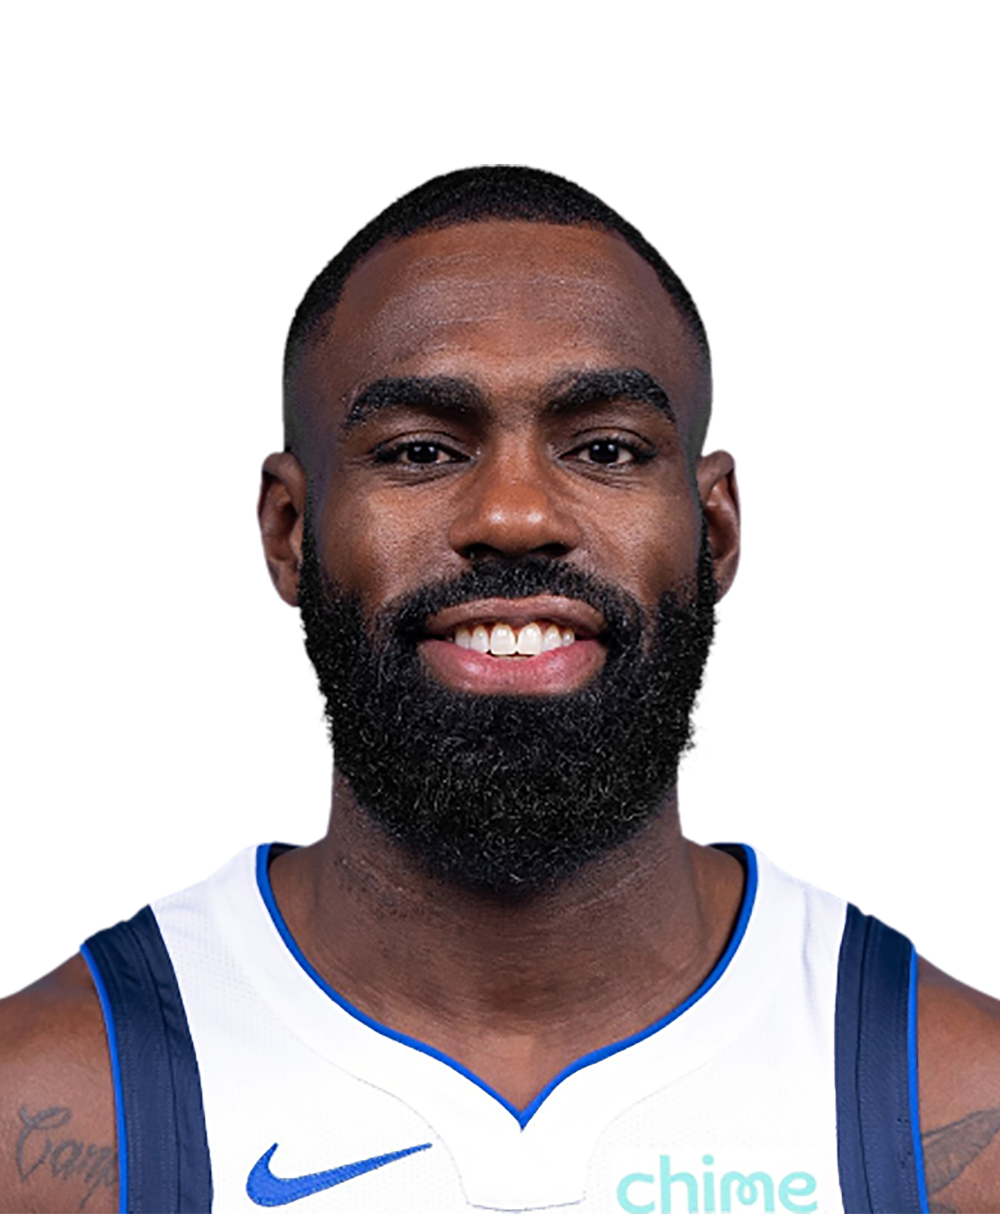 Whether or not Tim Hardaway Jr. can maintain his career season is